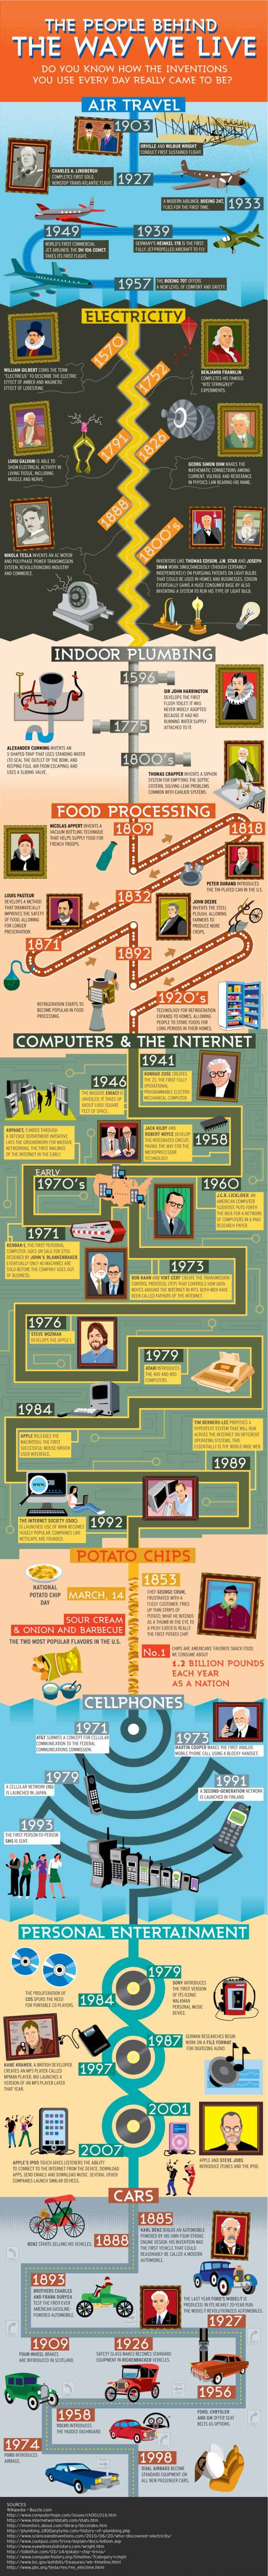 Infographic about how our everyday stuff came to be.